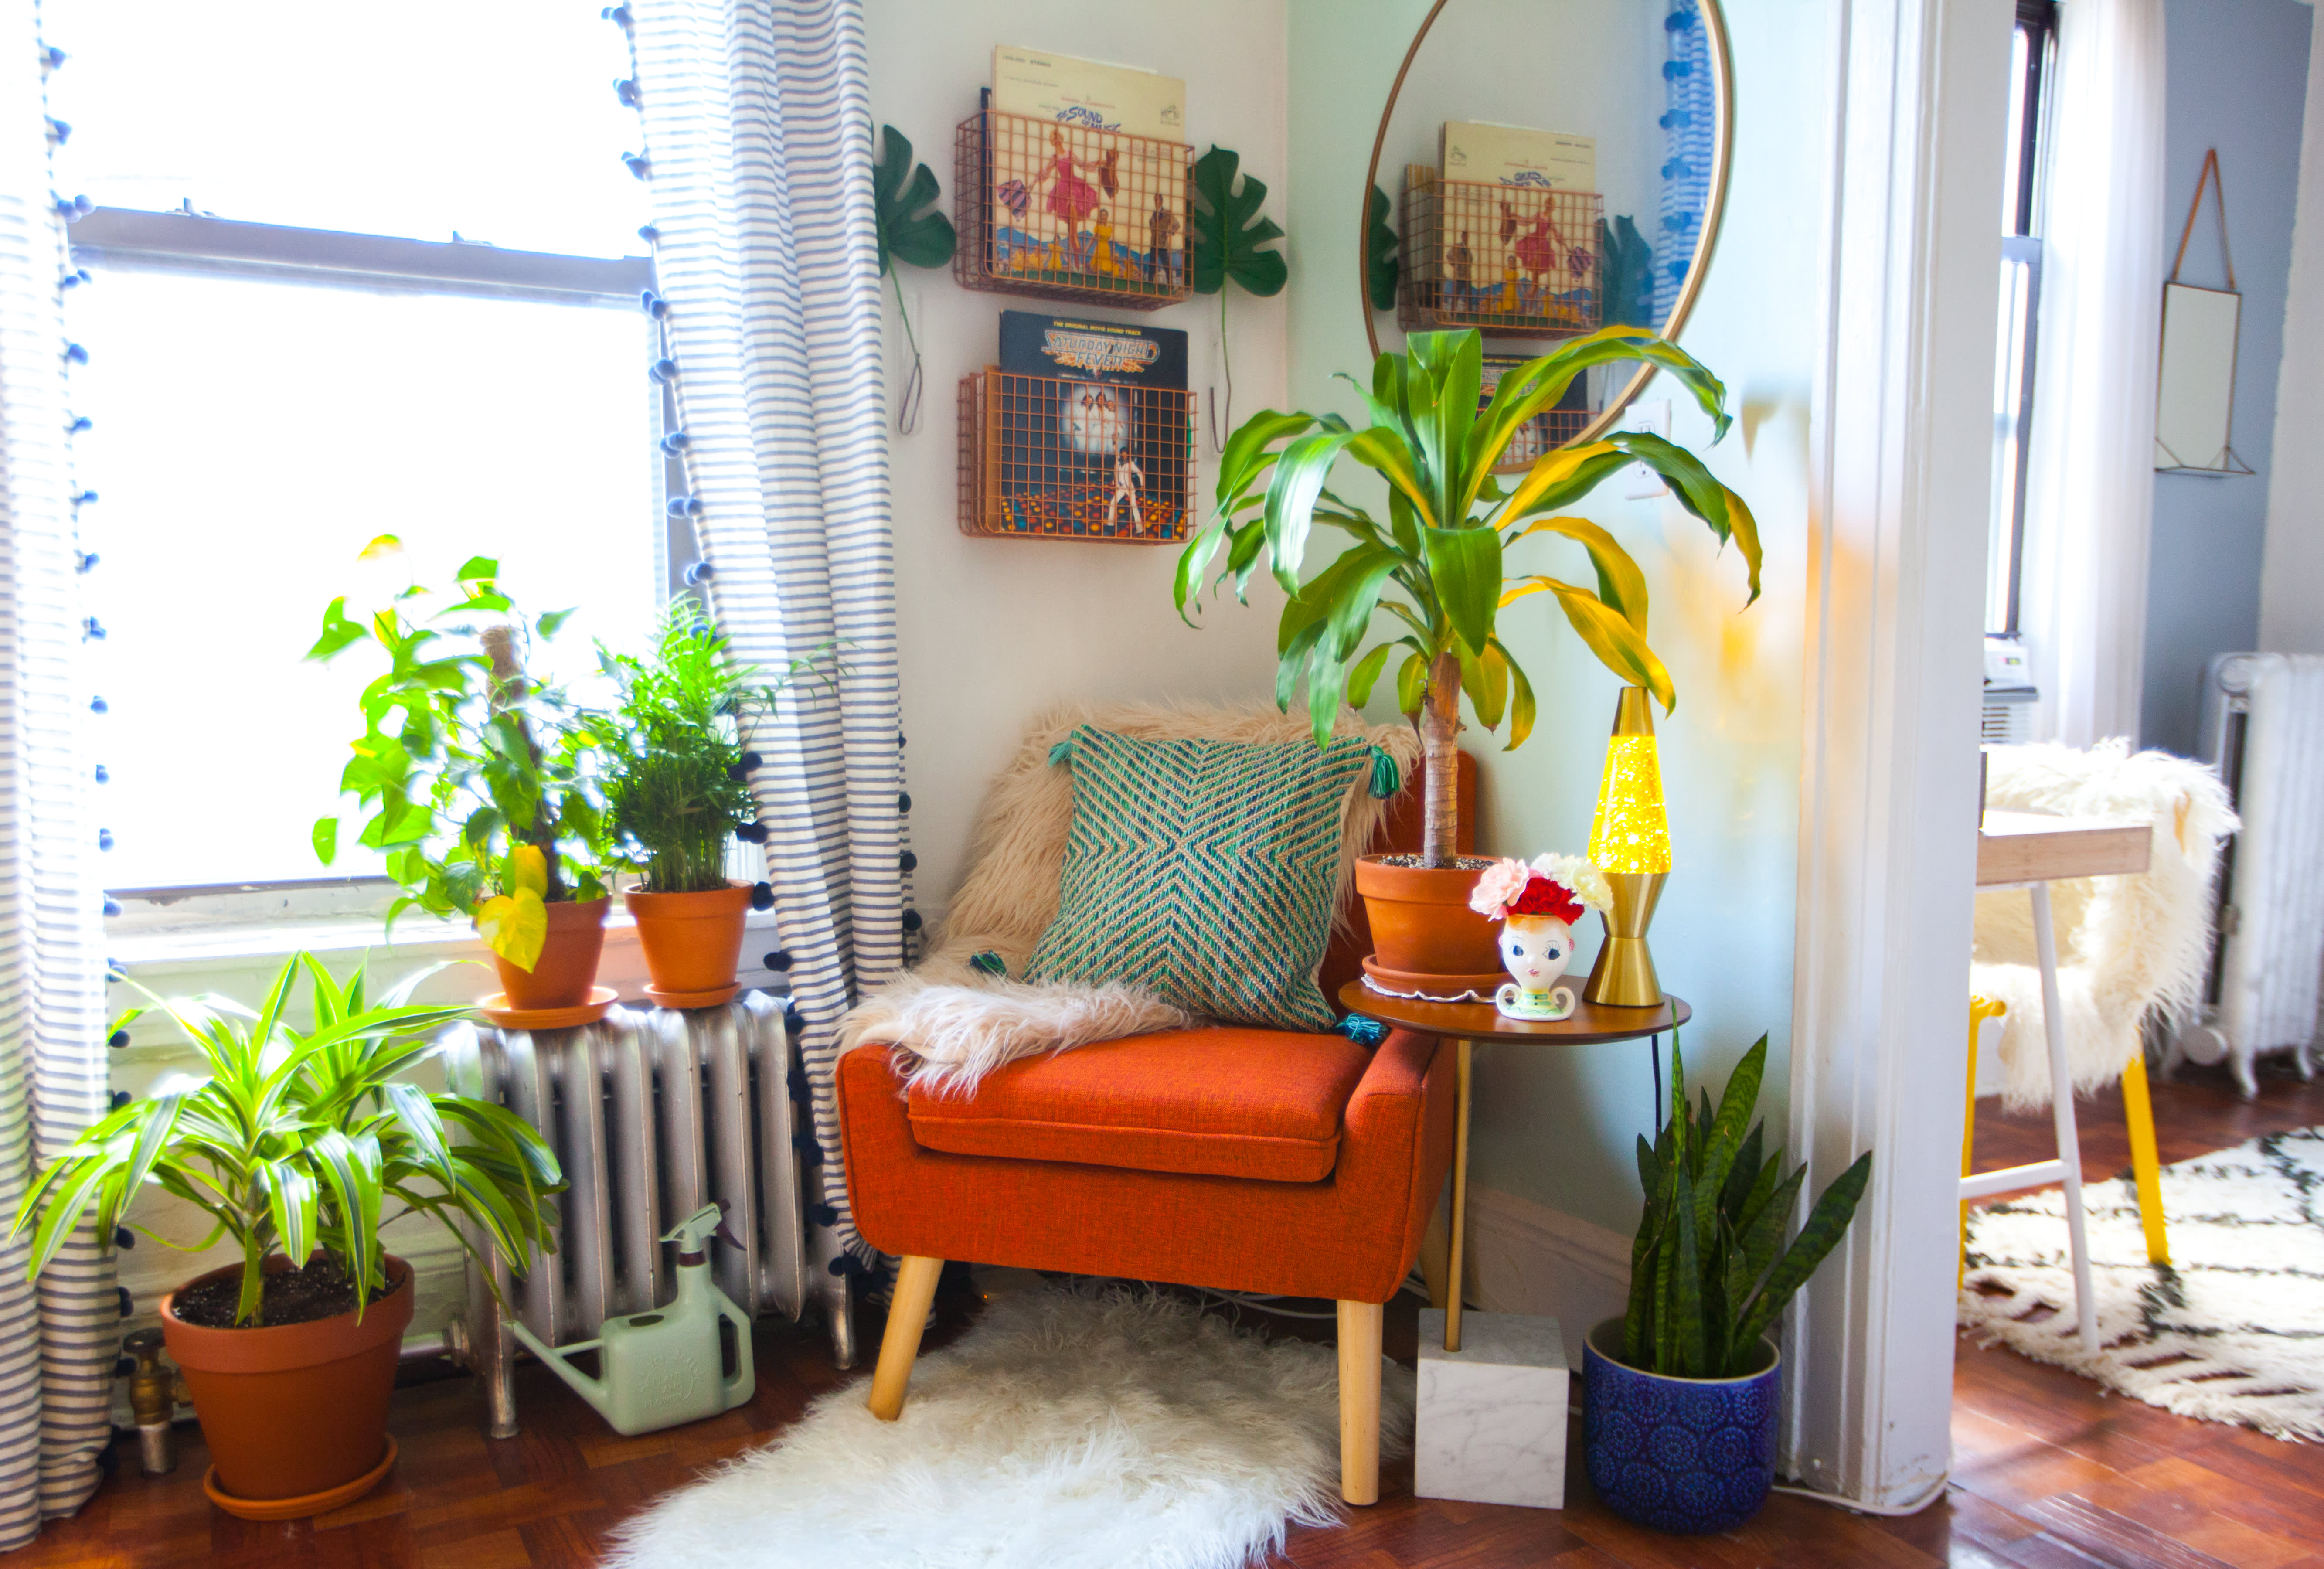 NYC Home Tour: A 425-Square-Foot Queens Apartment | Apartment Therapy